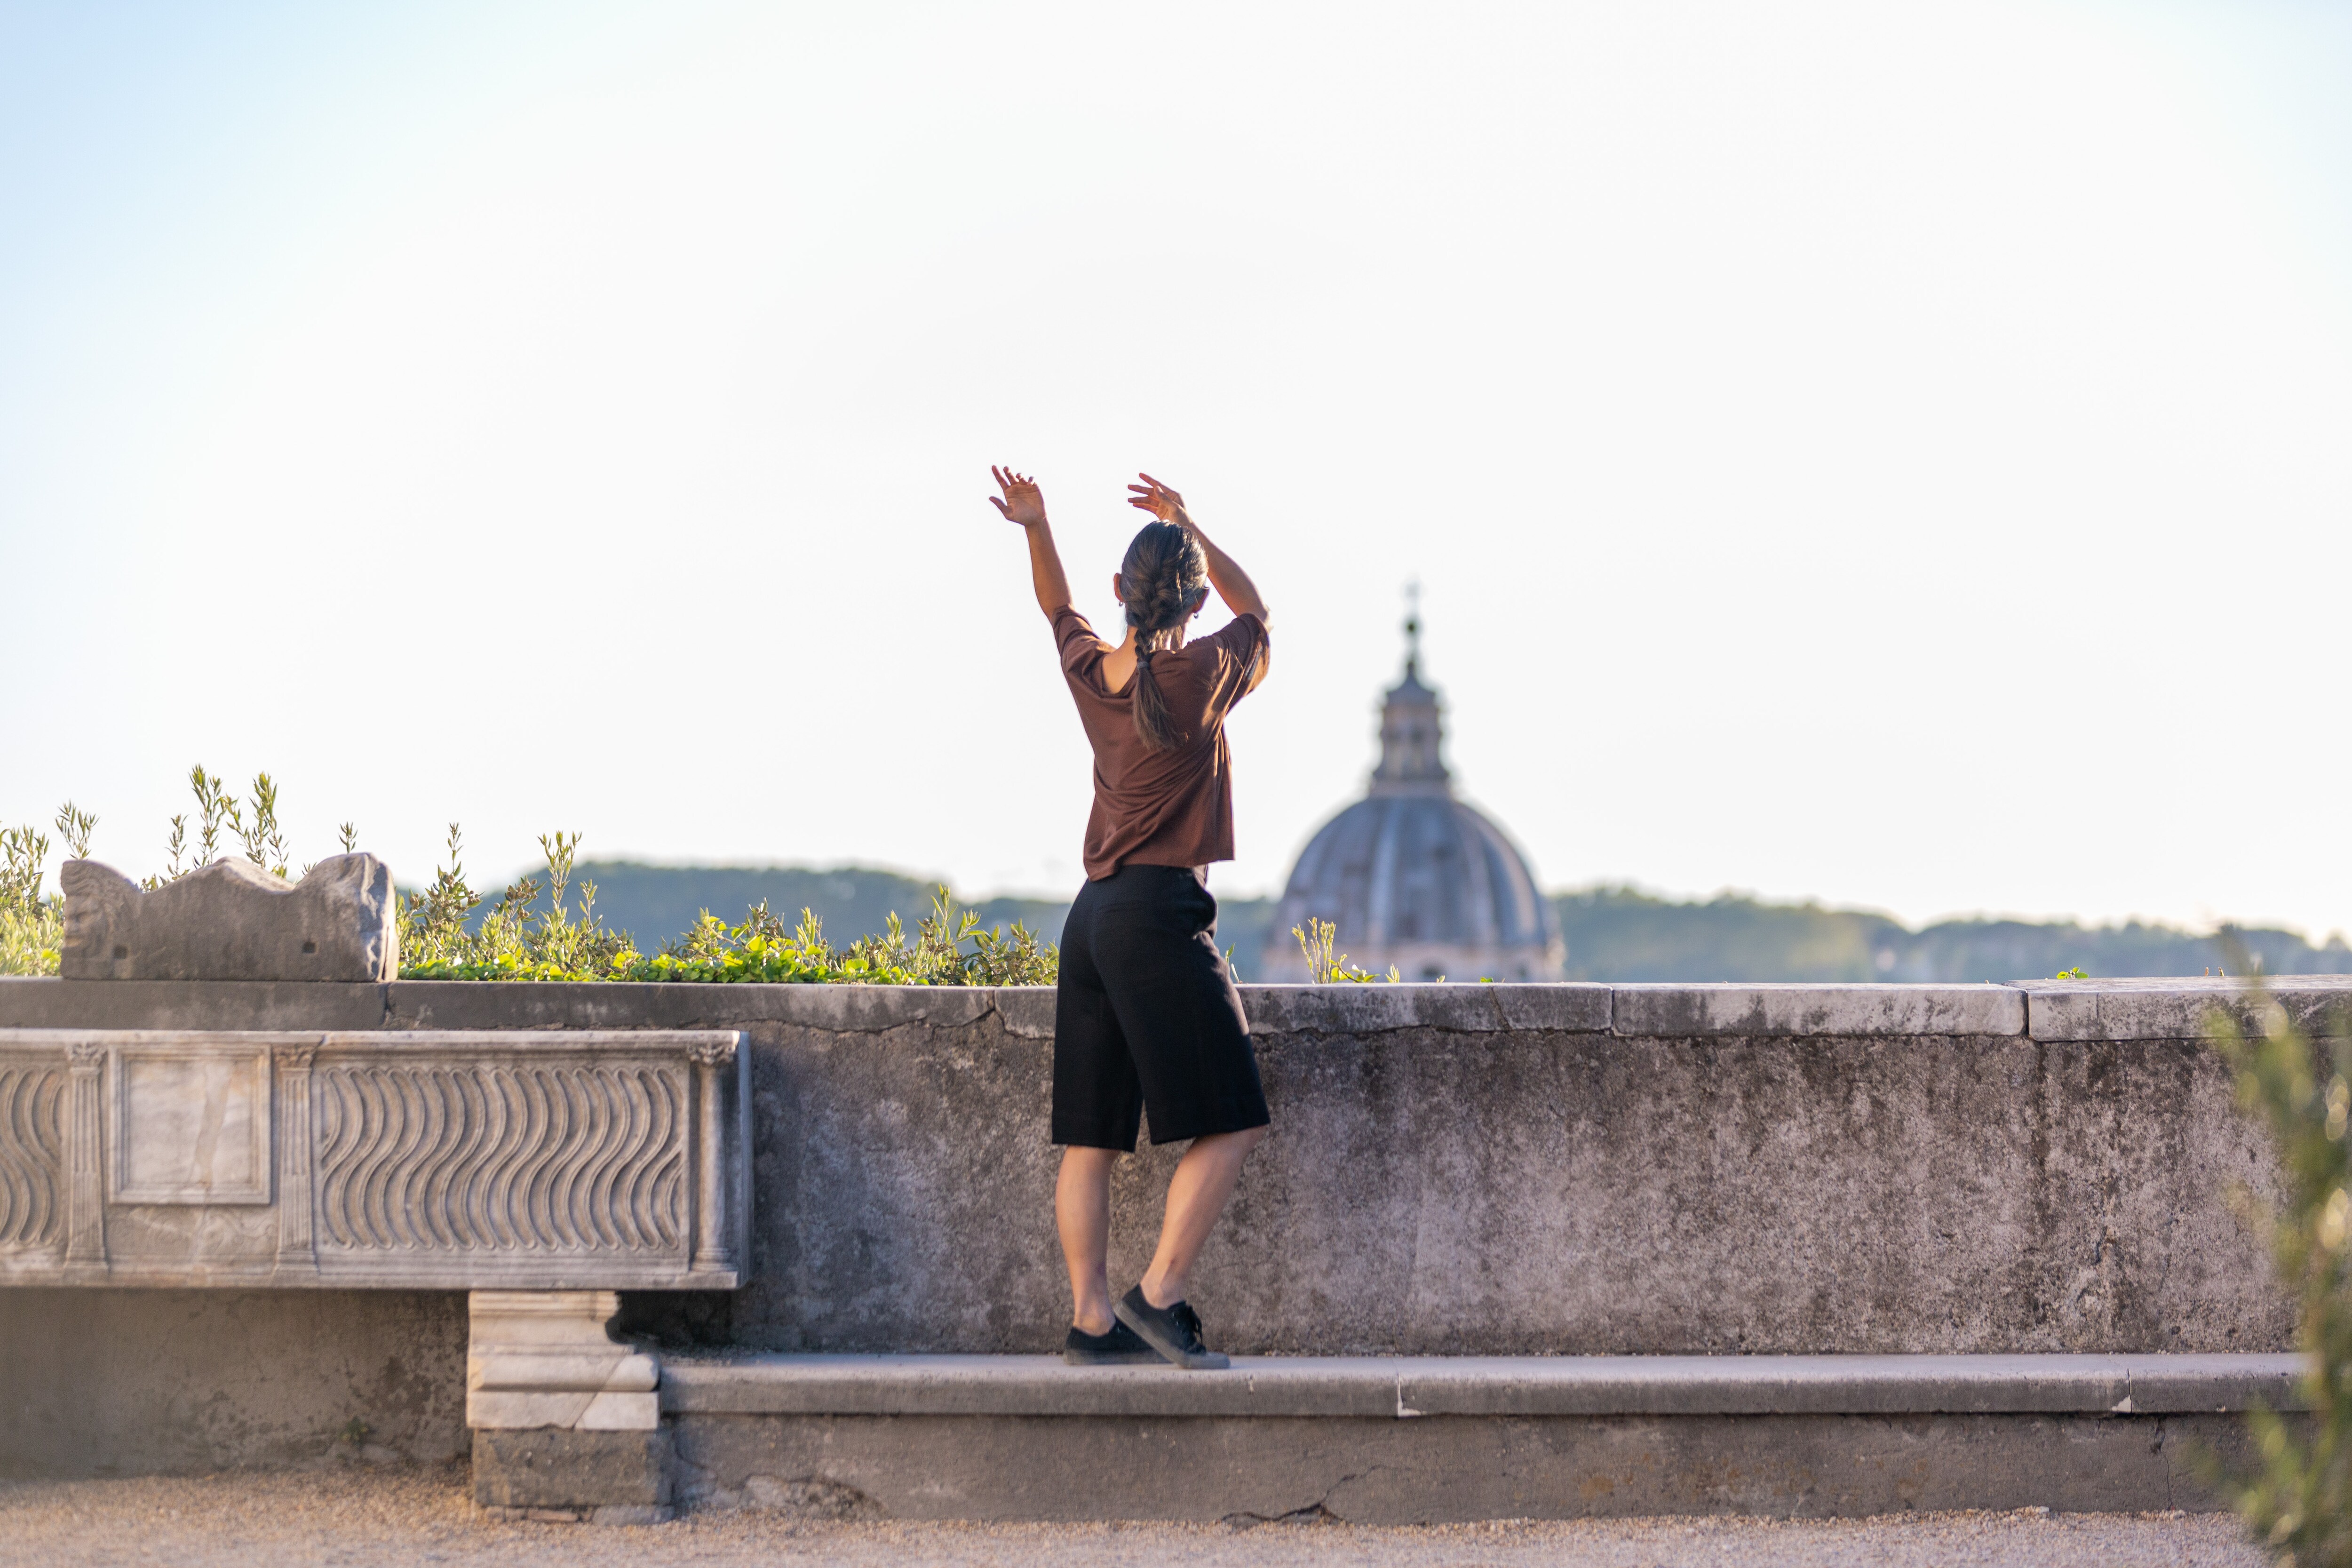 Dancer turned away with arms raised, standing on a low concrete wall